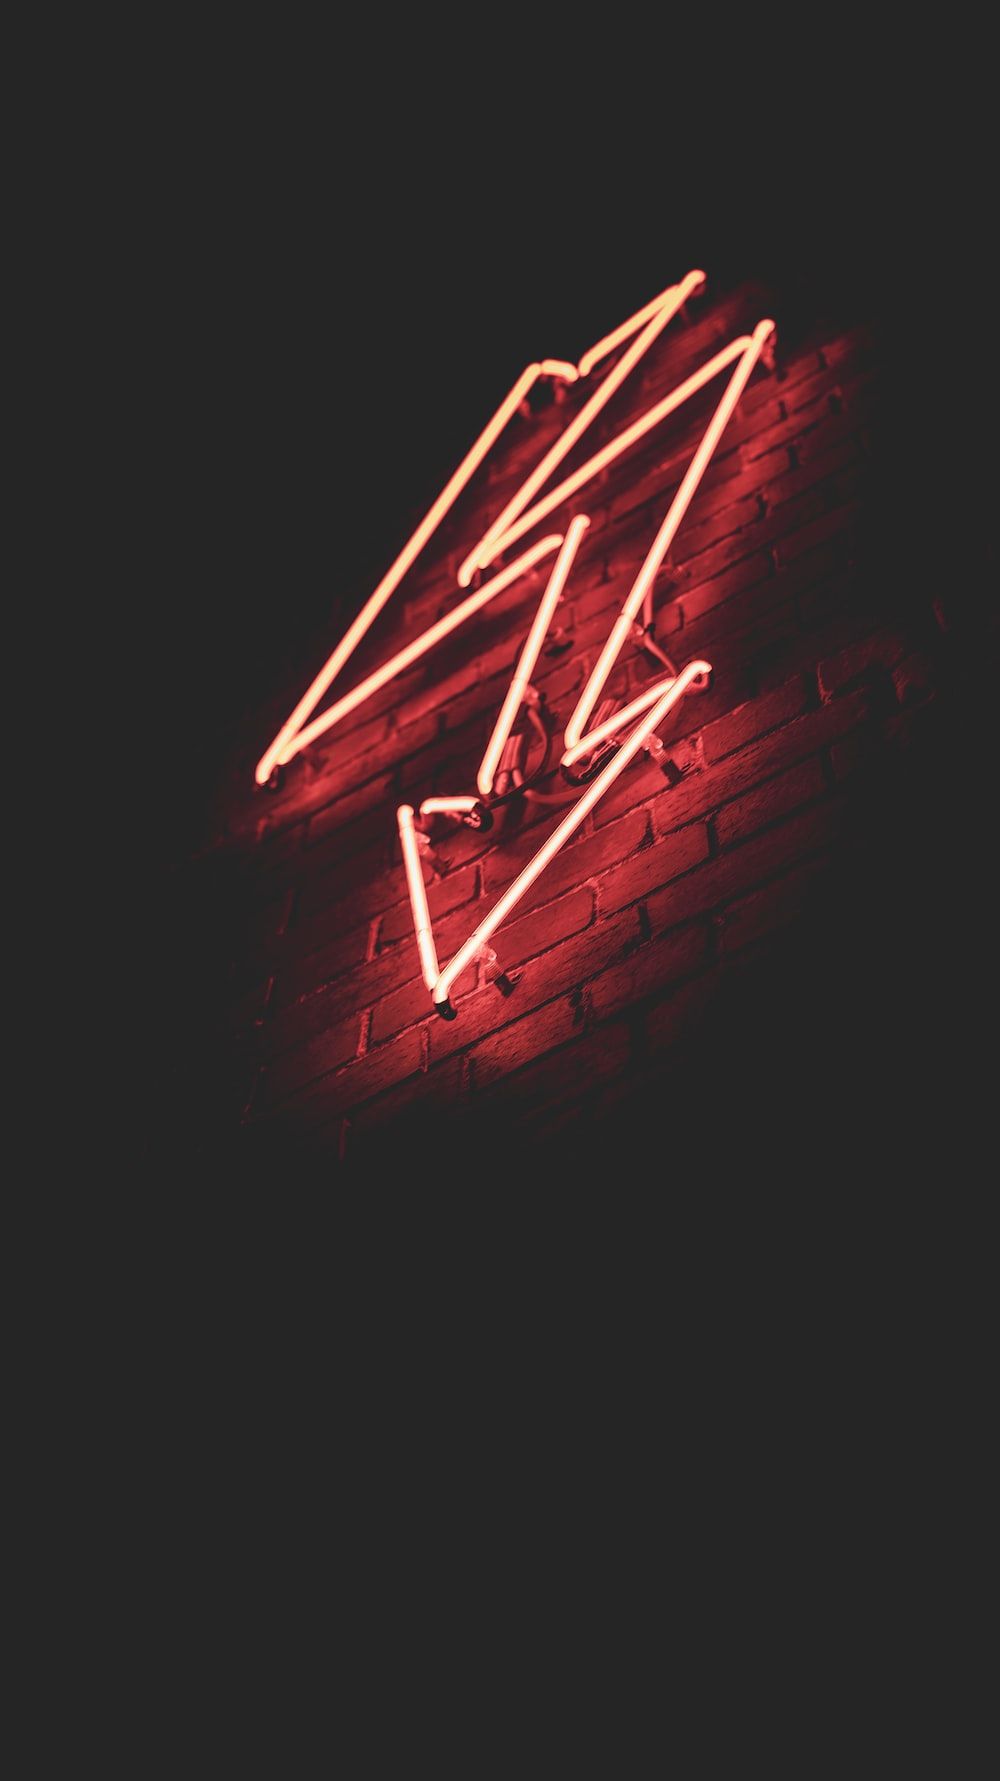 A neon sign of lightning bolt on a brick wall - Neon red